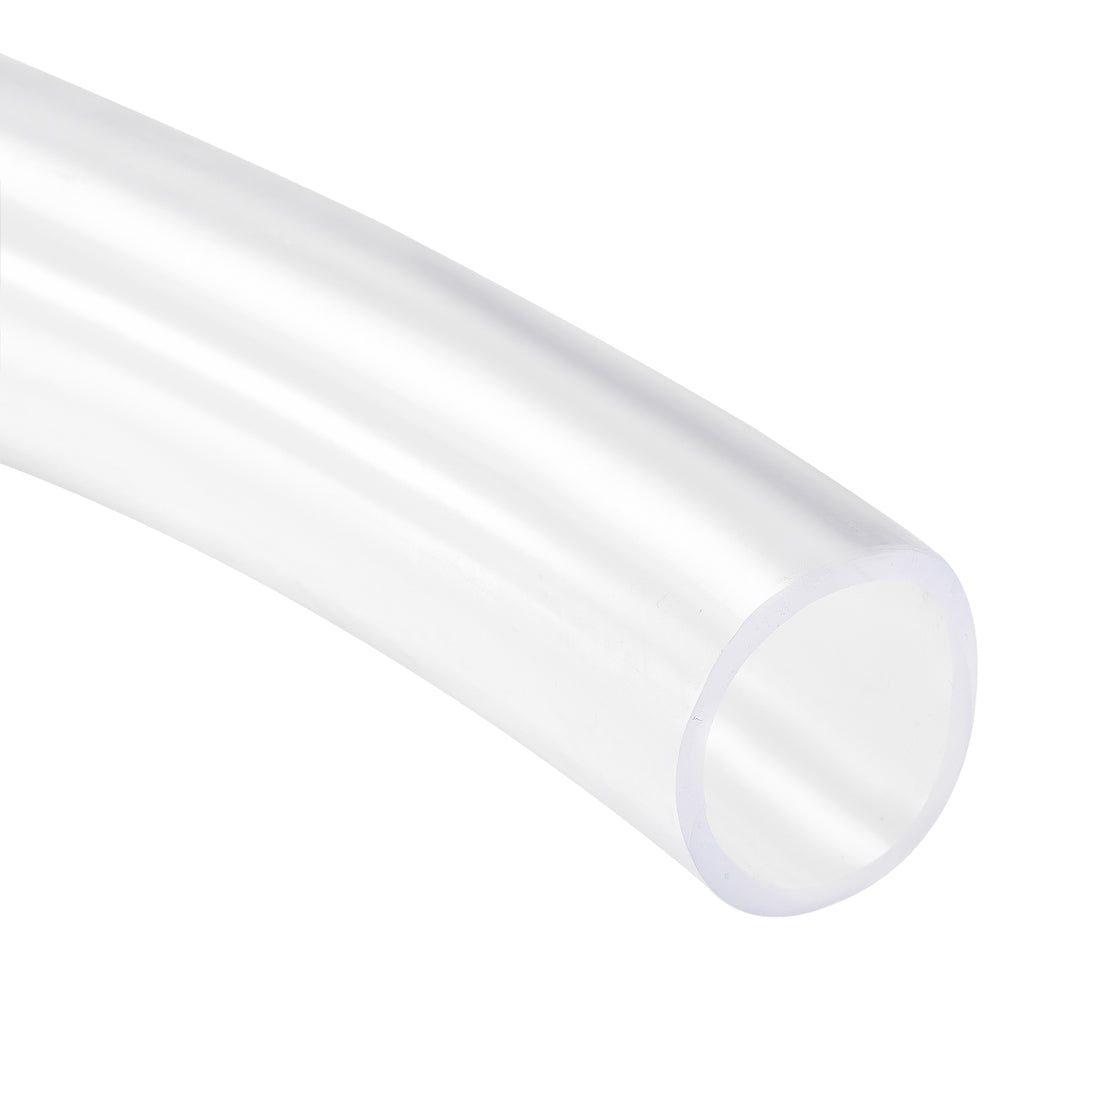 uxcell Uxcell PVC Hose Tube, 25mm(0.98") ID x 30mm(1.18") OD 1.5m Clear Vinyl Tubing